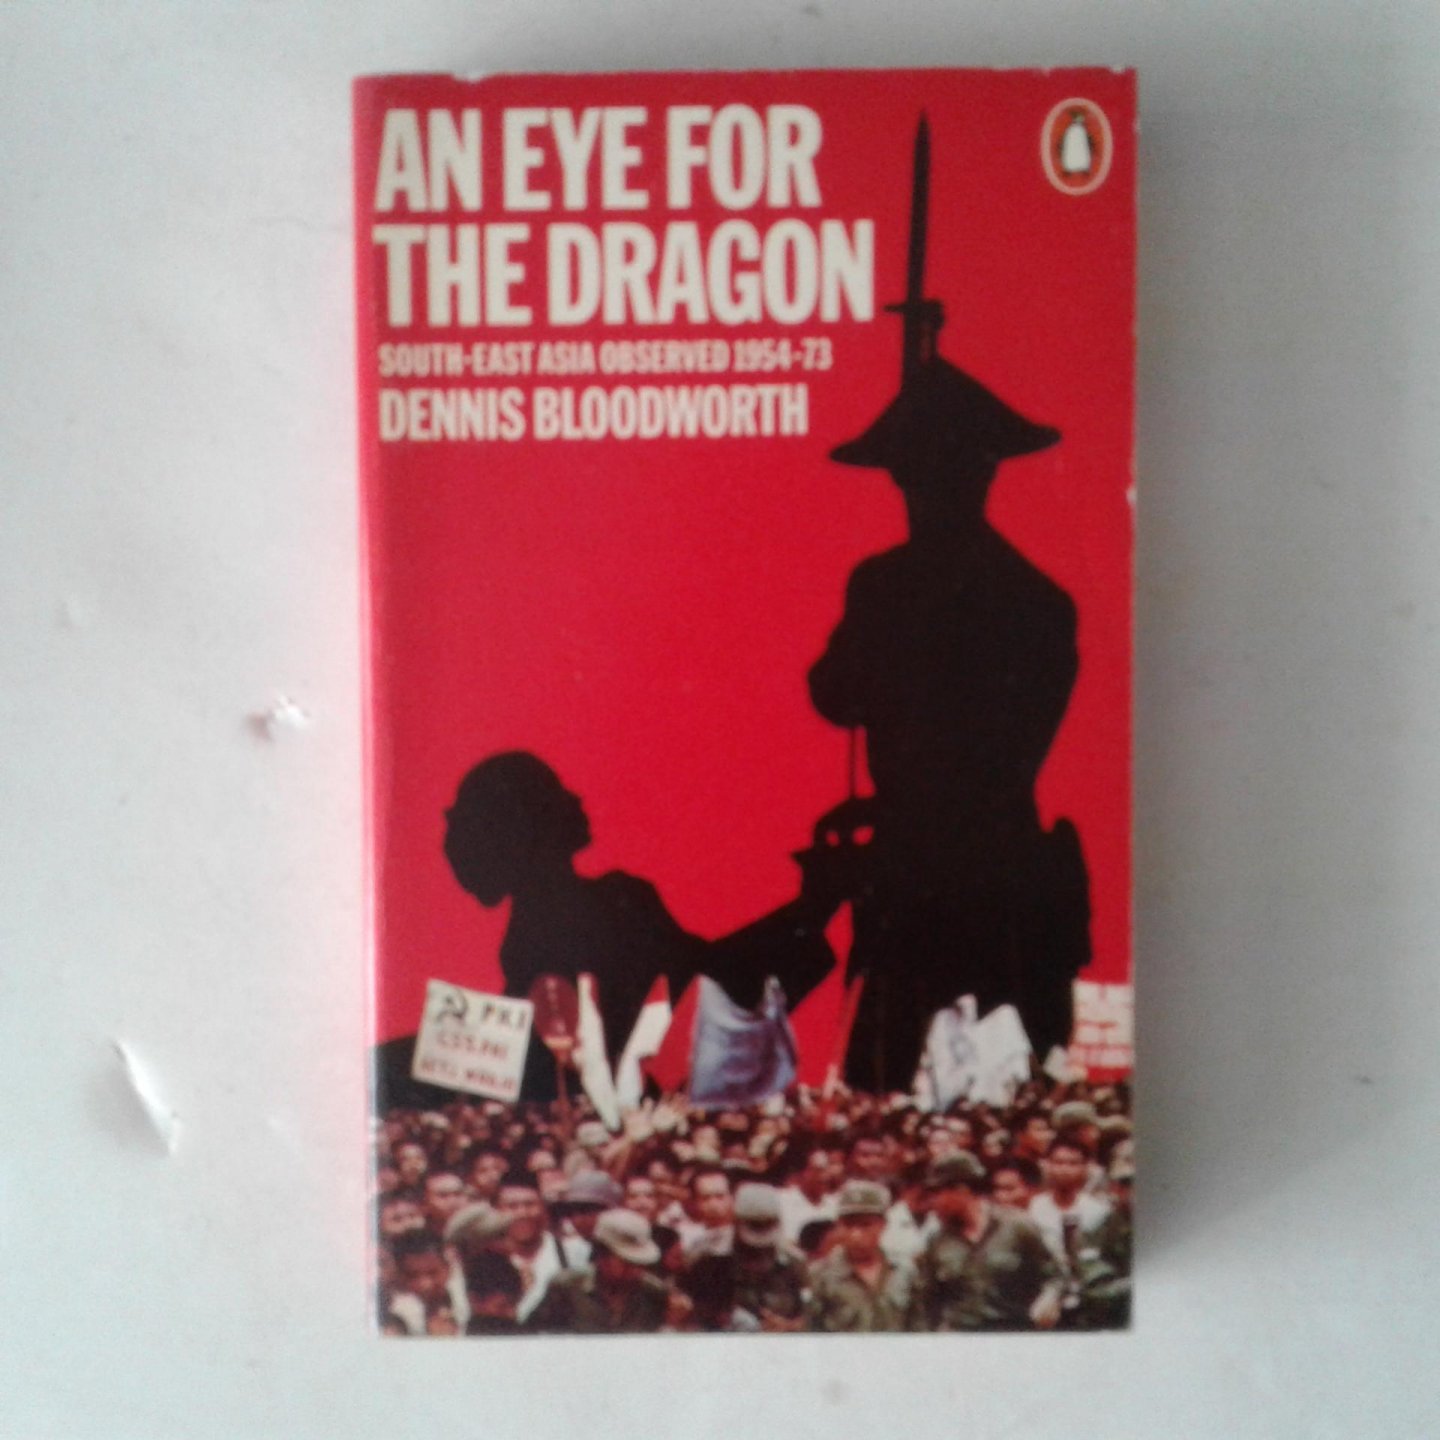 Bloodworth, Dennis - An Eye For the Dragon ; South-East Asia Observed 1954-73